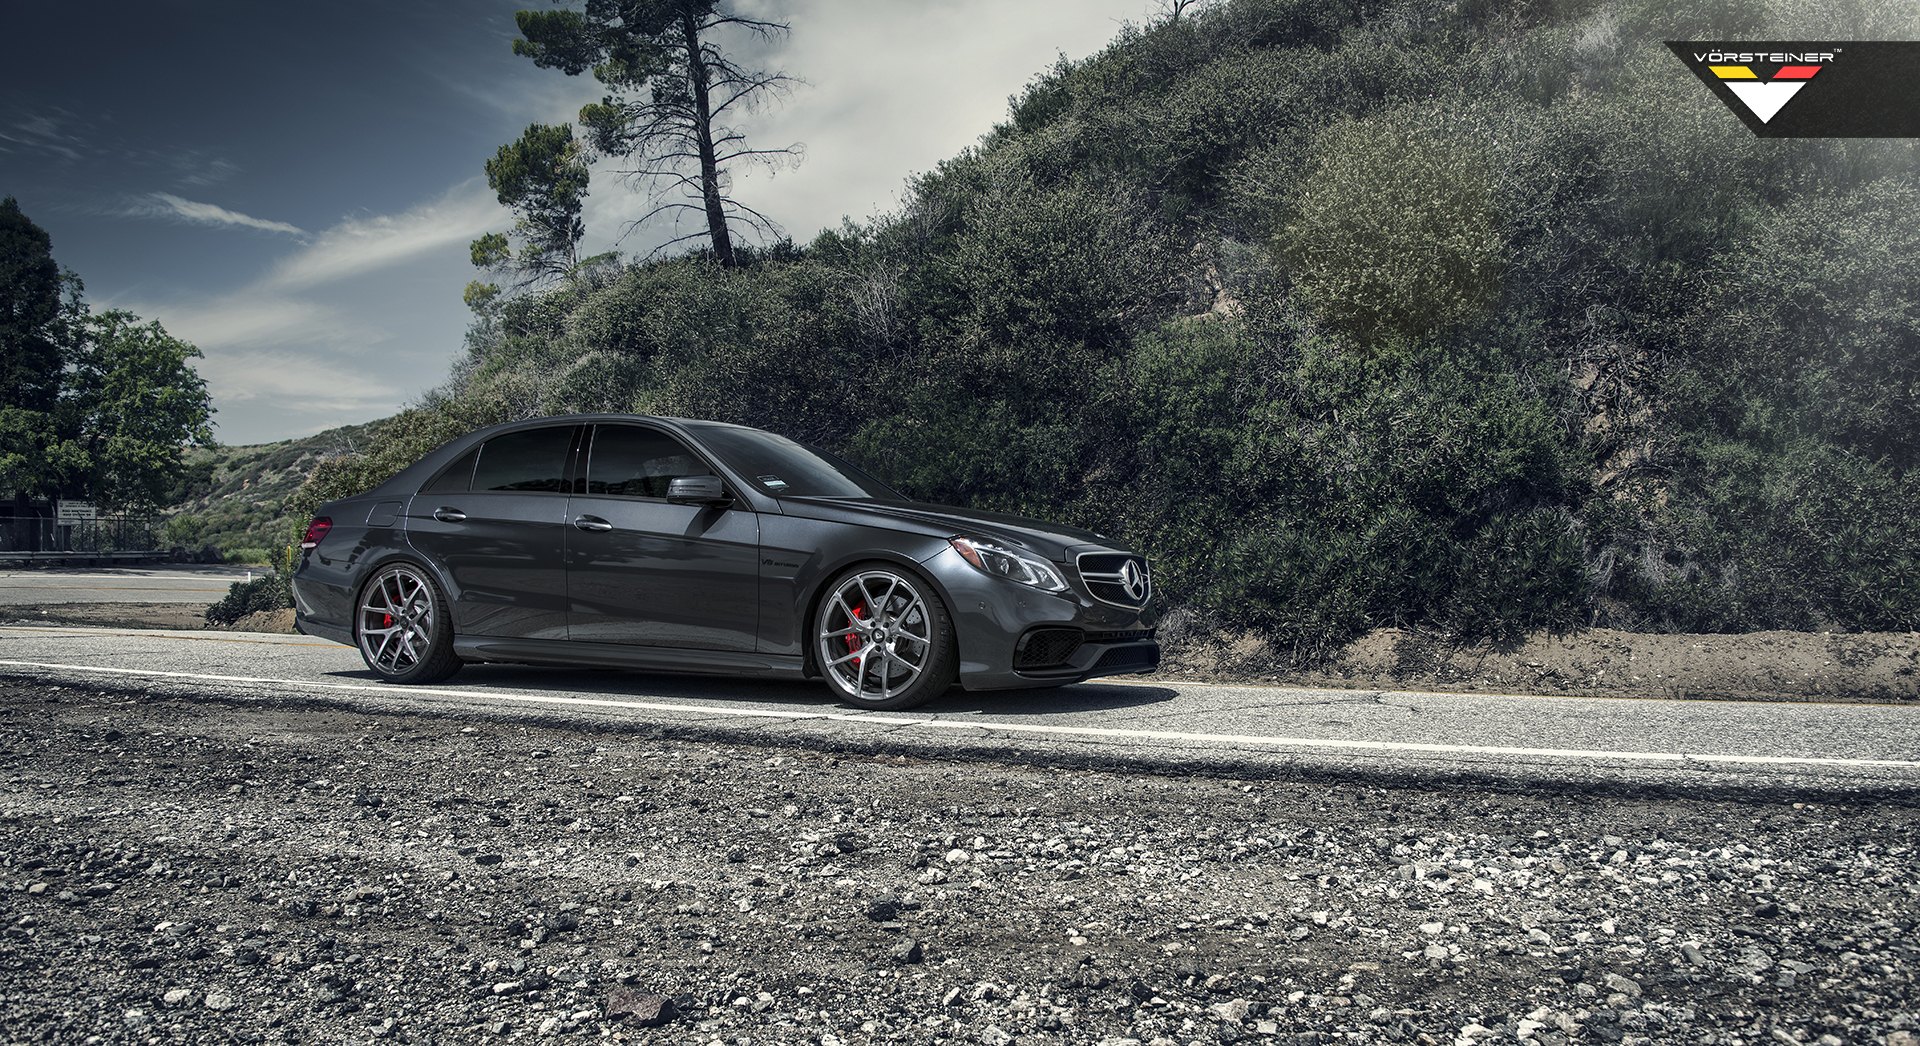 Black Mercedes E Class with Custom Side Skirts - Photo by Vorstiner